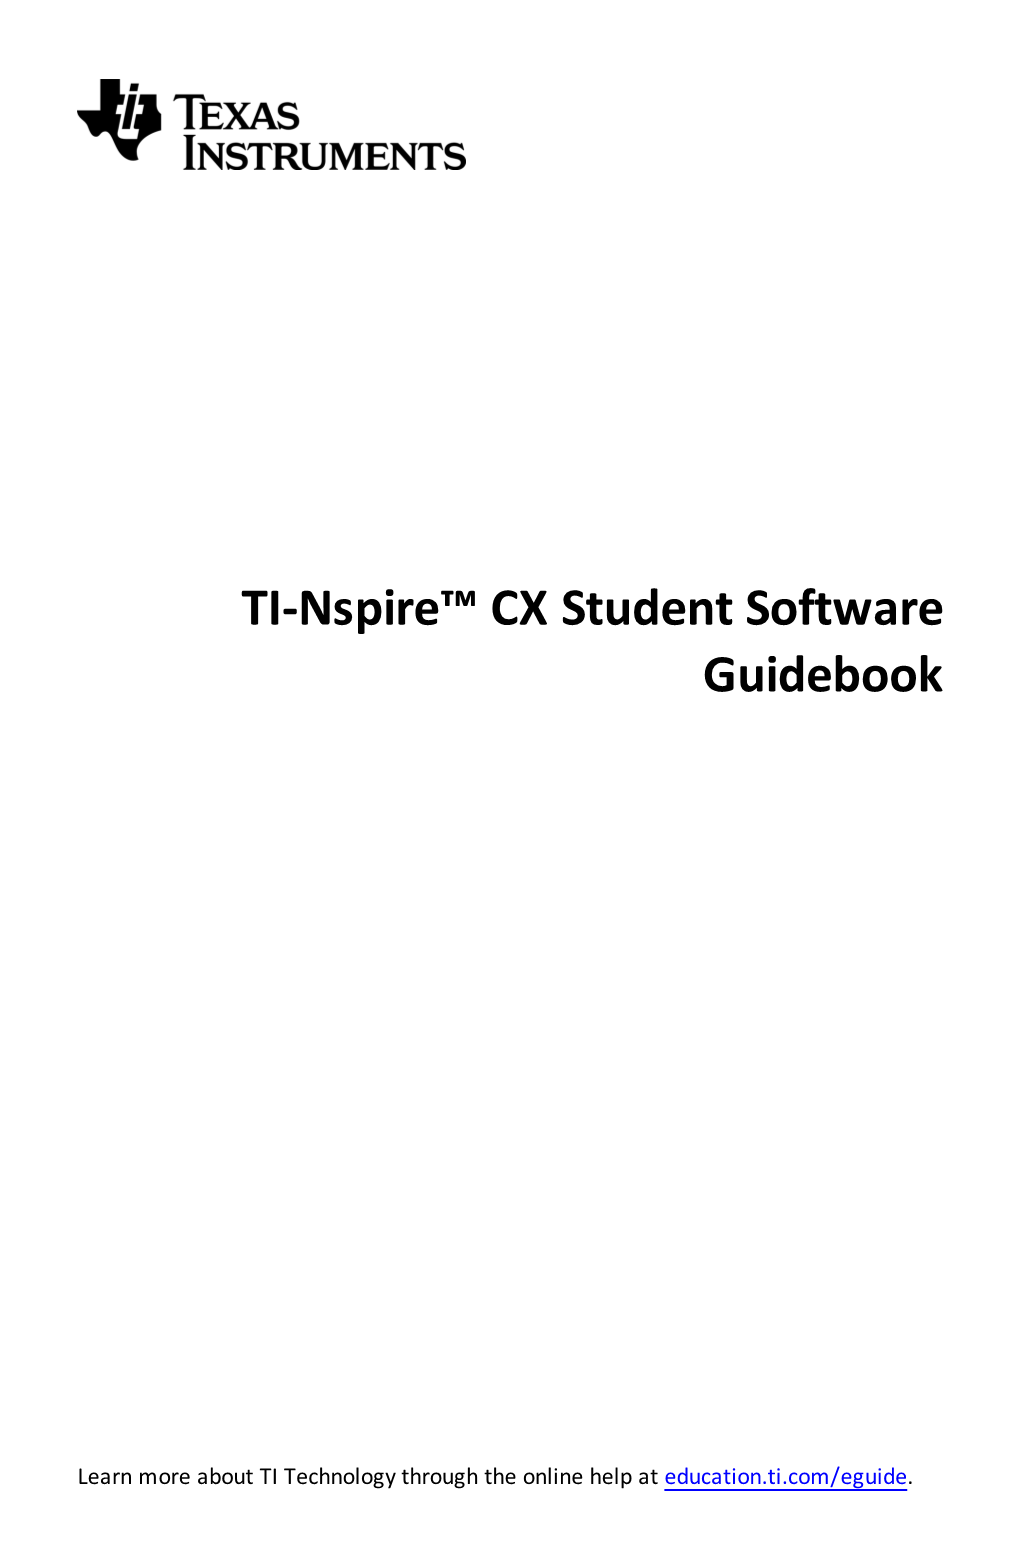 TI-Nspire™ CX Student Software Guidebook